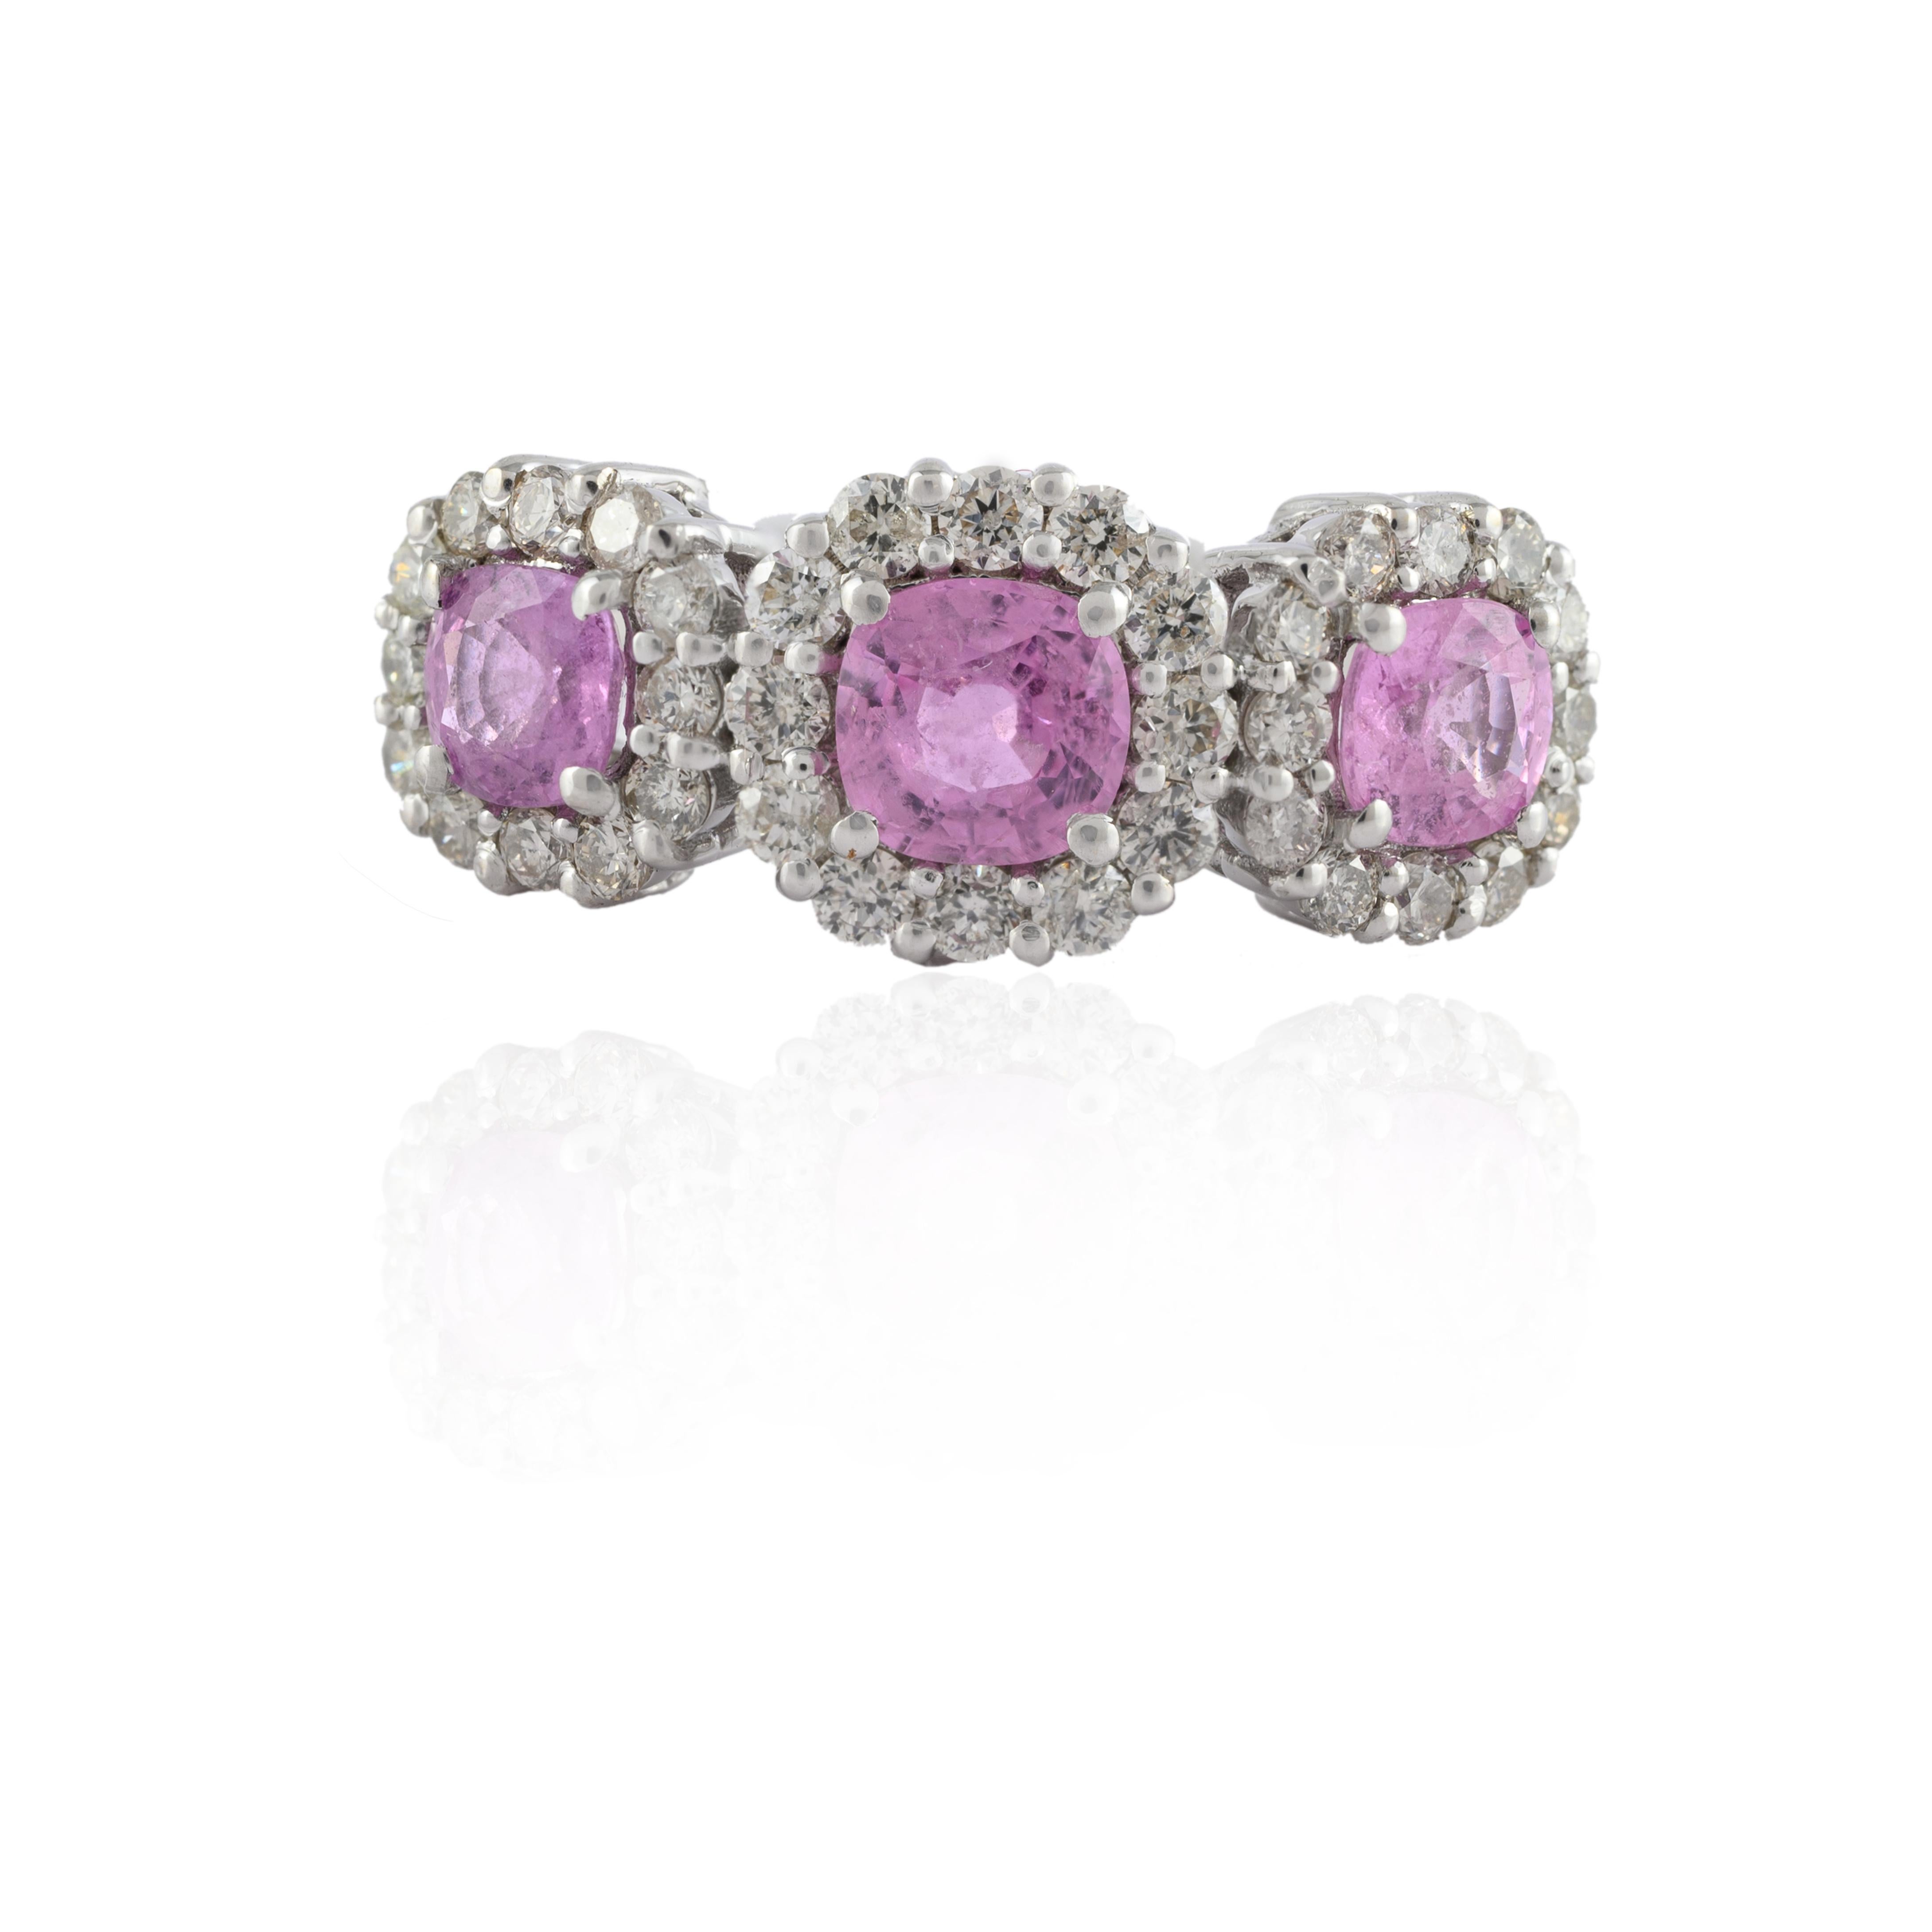 For Sale:  Pink Sapphire Diamond Halo Three-Stone Engagement Ring in 14k Solid White Gold 3